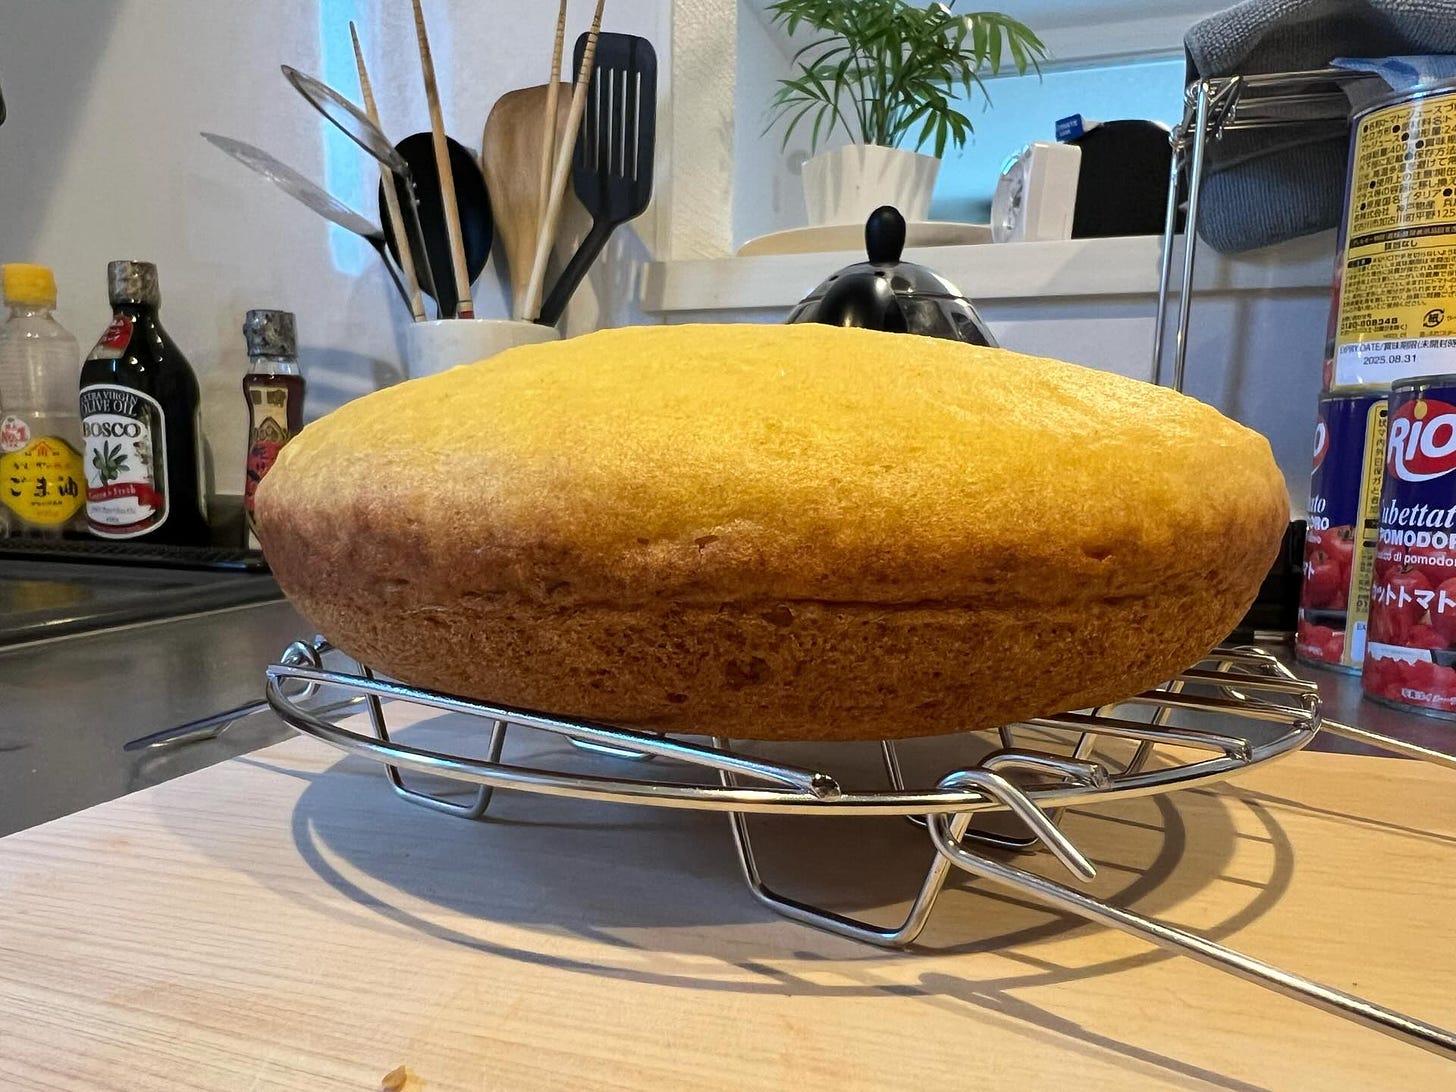 A cornbread made in a rice cooker cooling on a rack in a kitchen.